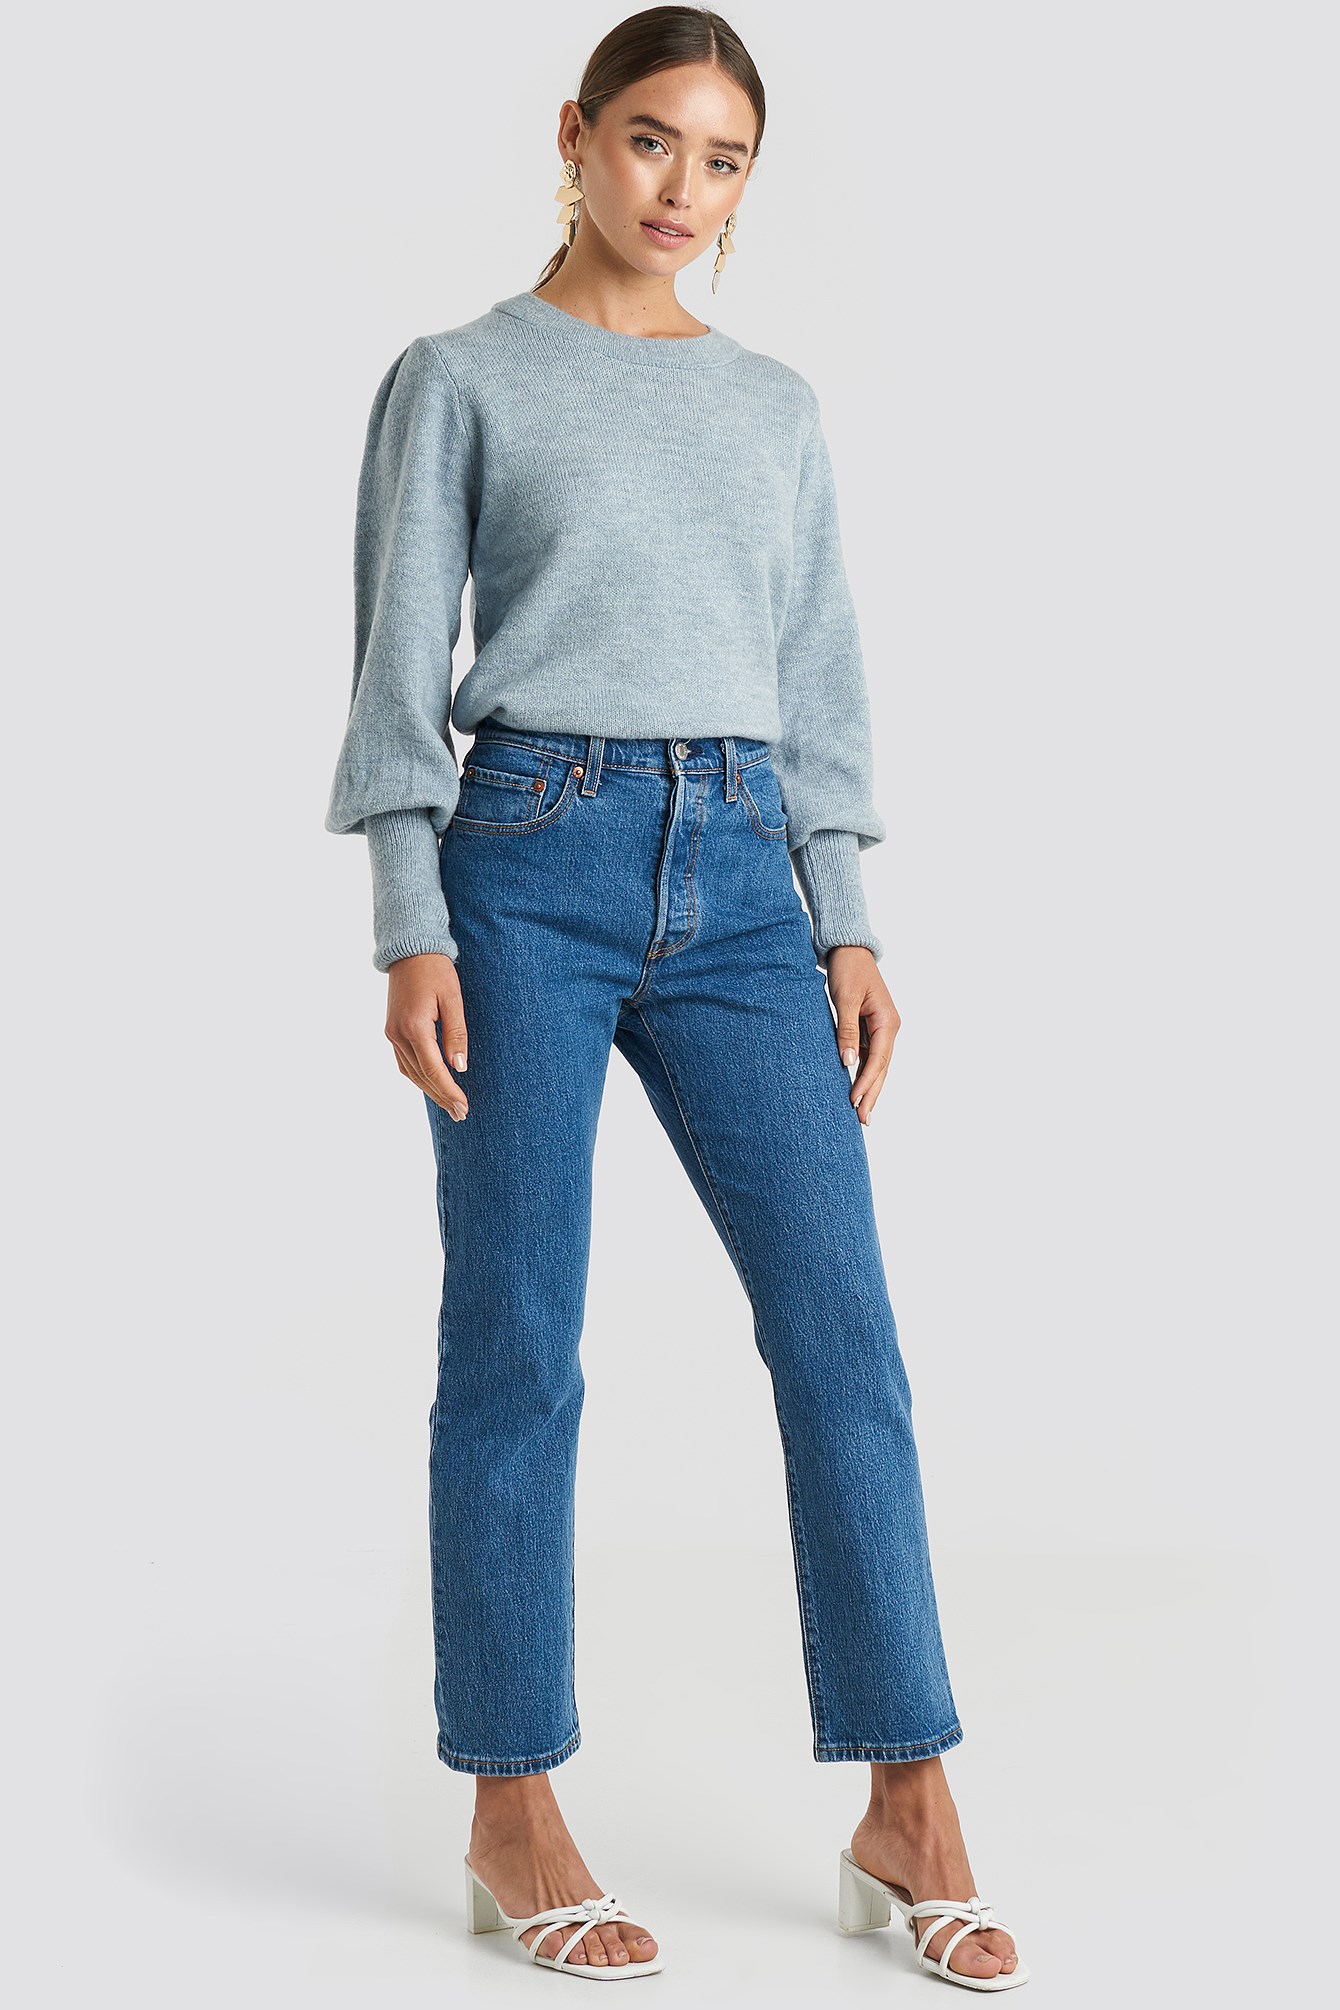 Stone Blue Cropped Long Sleeve Knitted Sweater